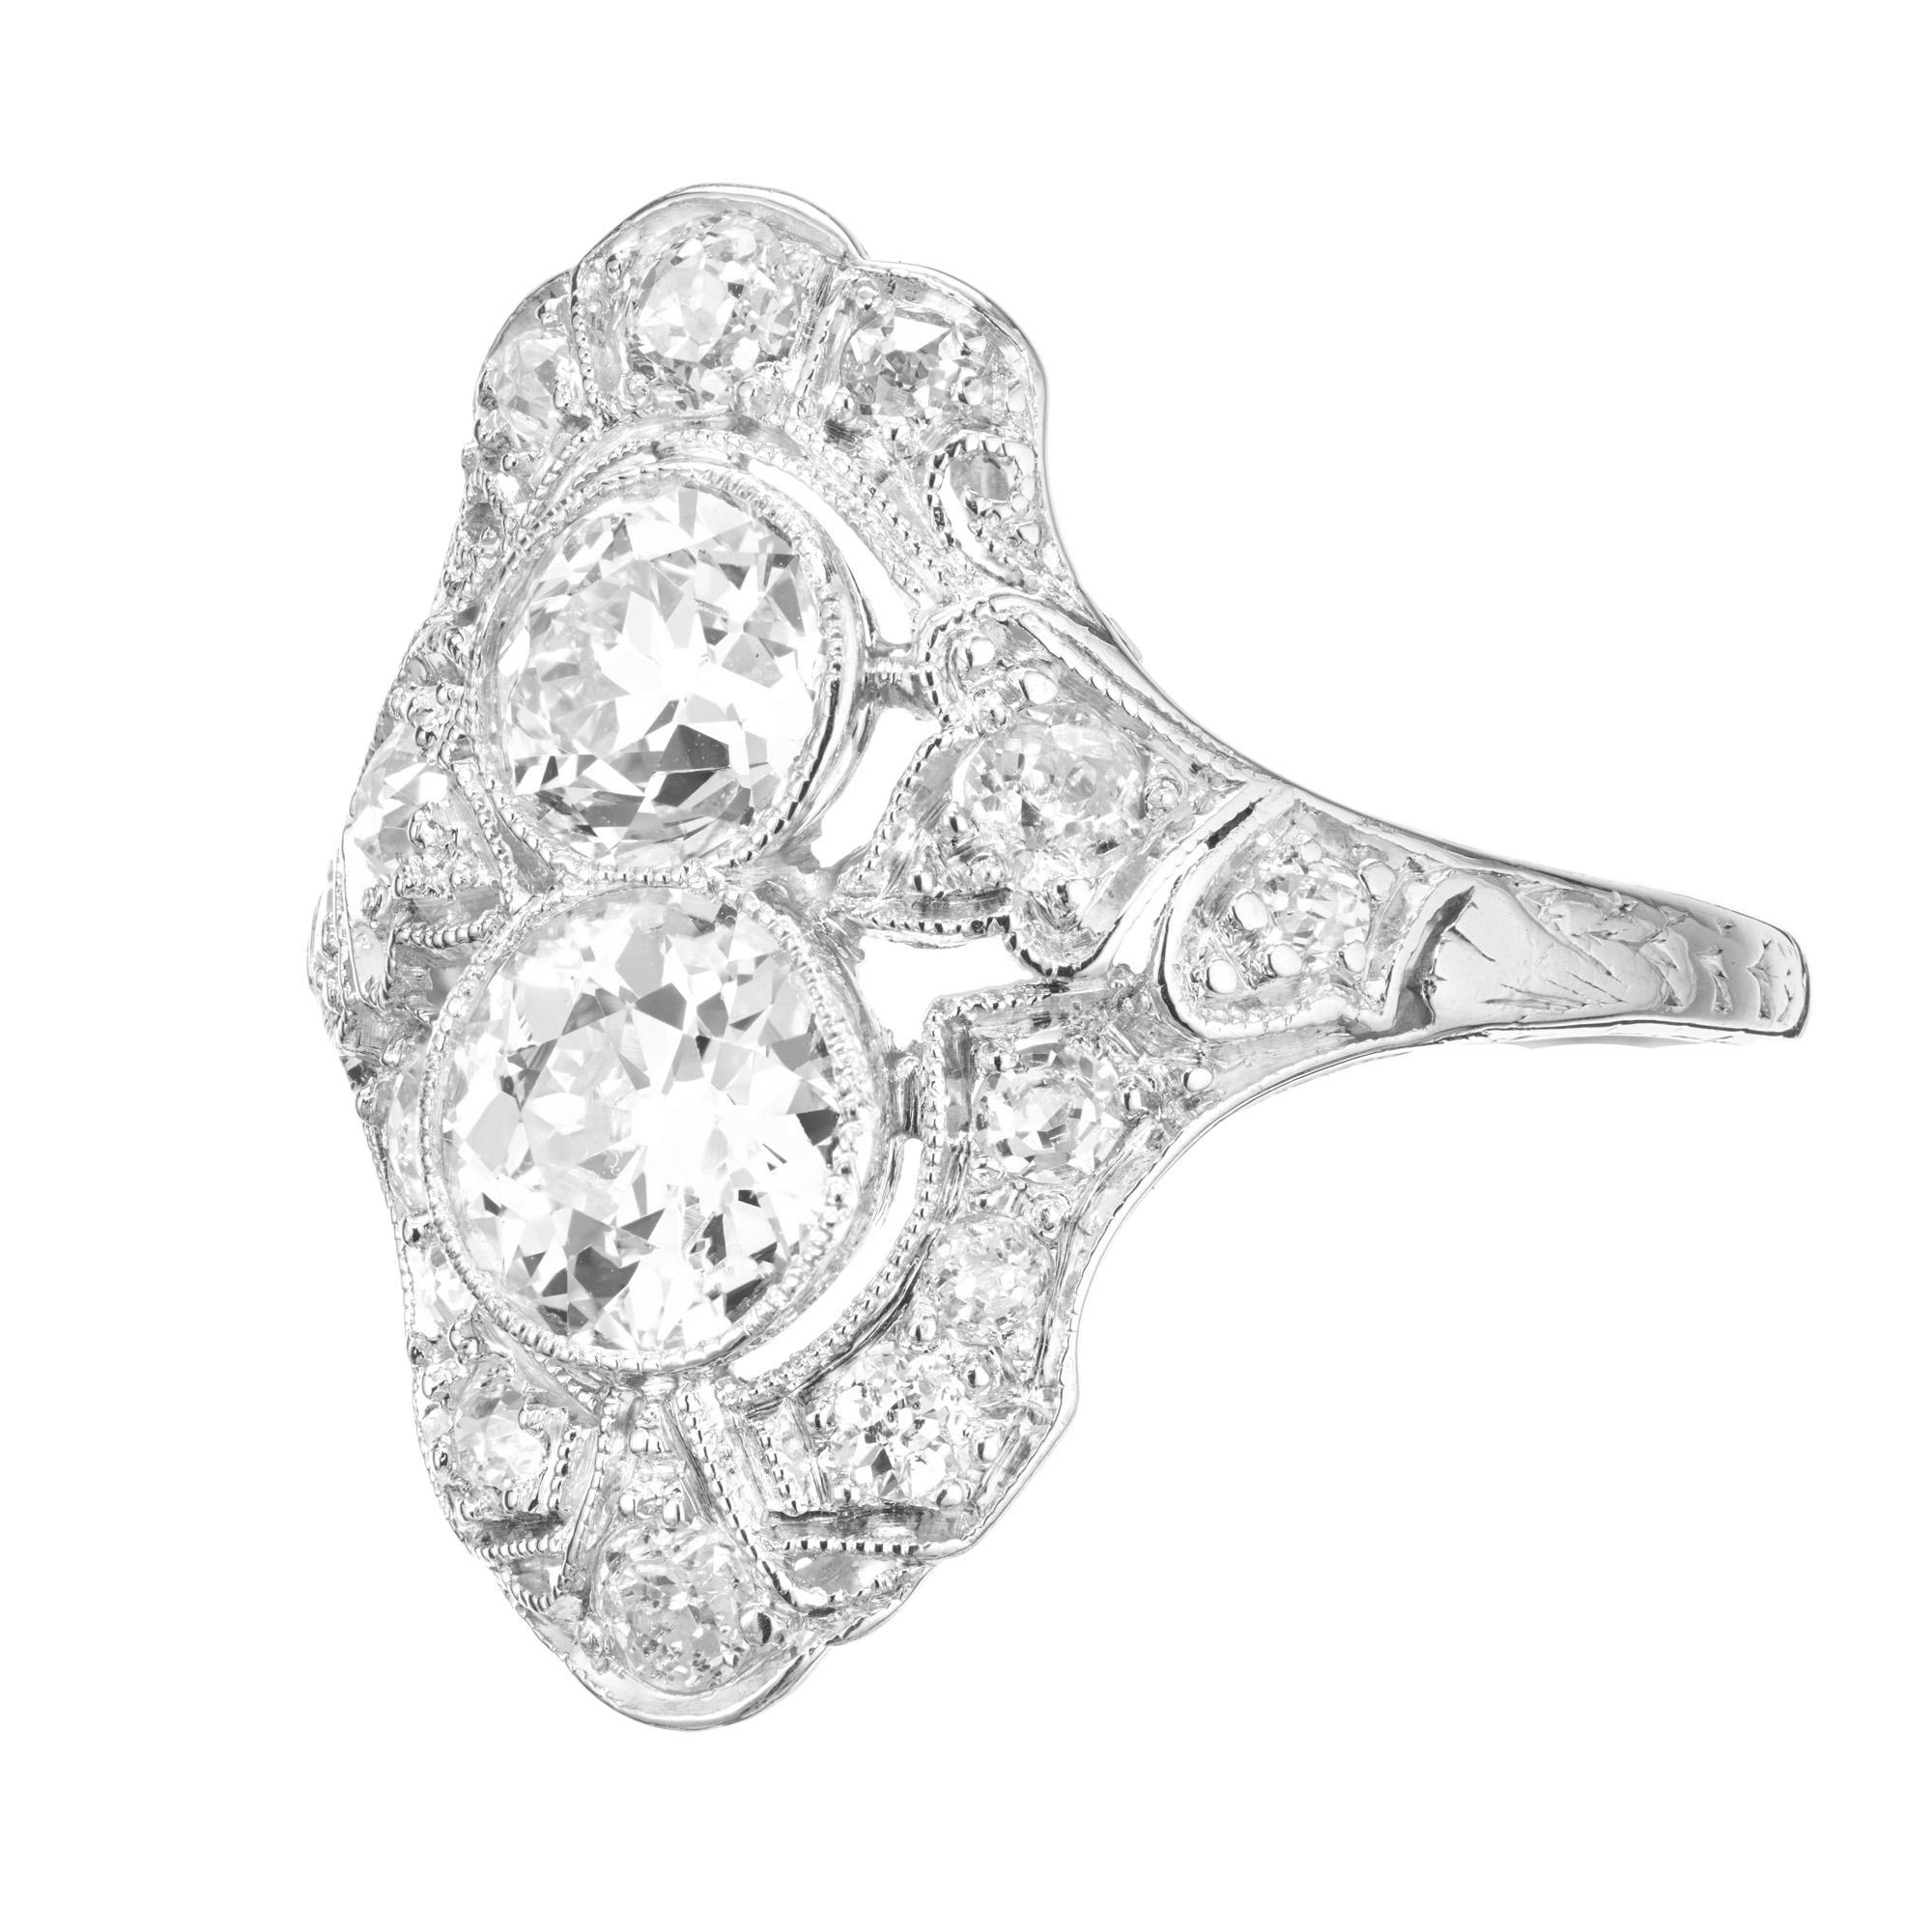 Double diamond engagement ring. 2 EGL certified Old European cut center stones totaling 1.16 carats set in a platinum handmade friligree setting, accented with 14 old mine cut diamonds. The ring dates back to the late Edwardian era, 1910. The two